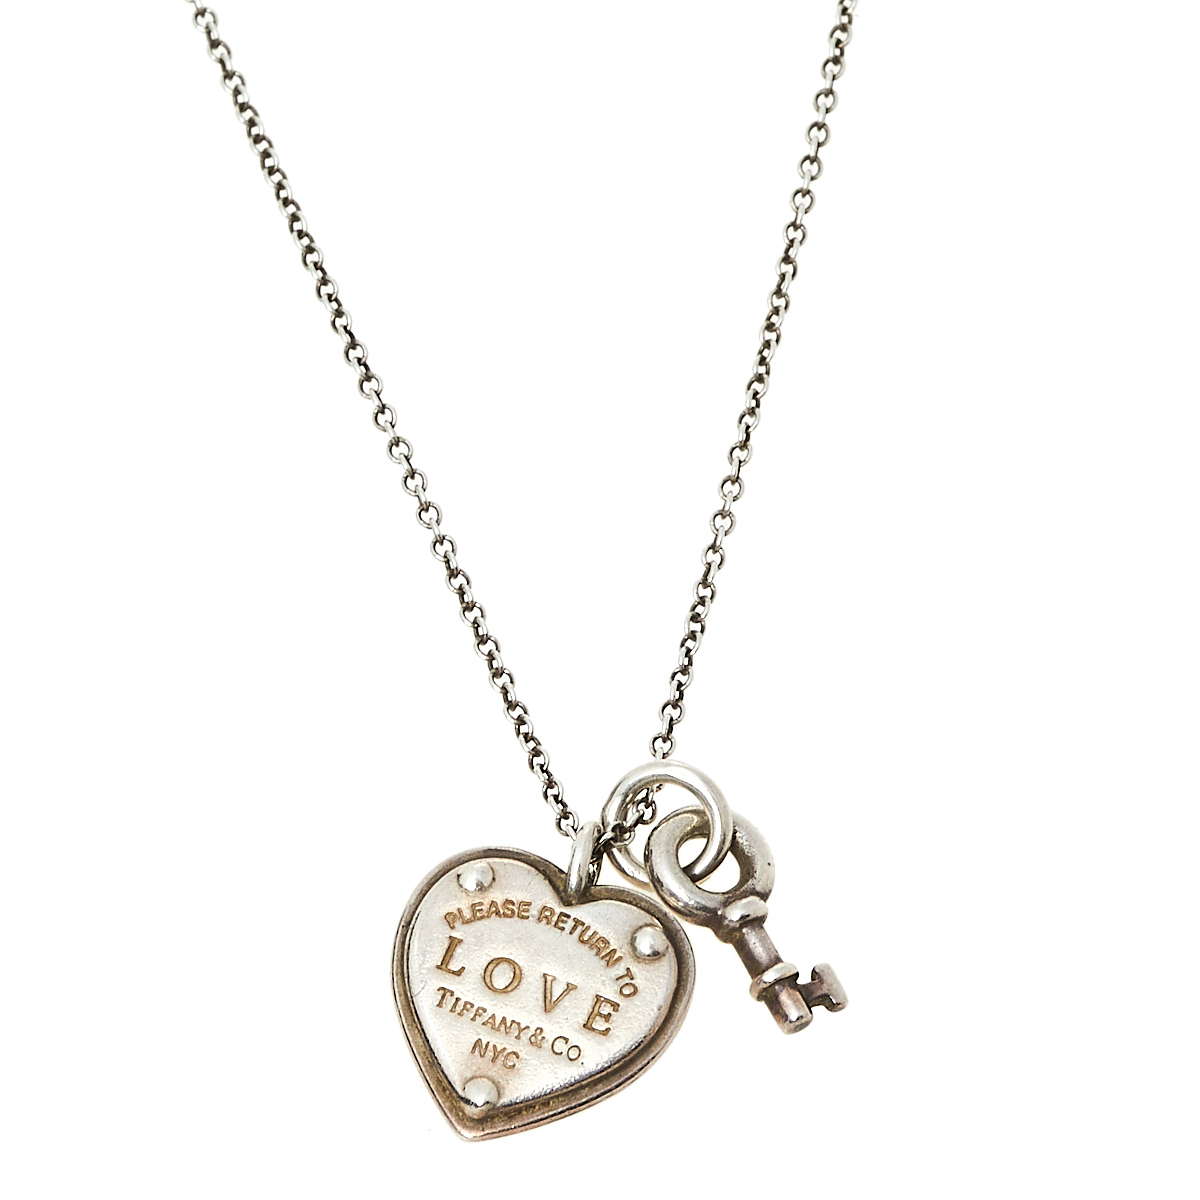 Tiffany & Co. Return To Tiffany Love Heart Tag and Key Pendant Sterling Silver Necklace